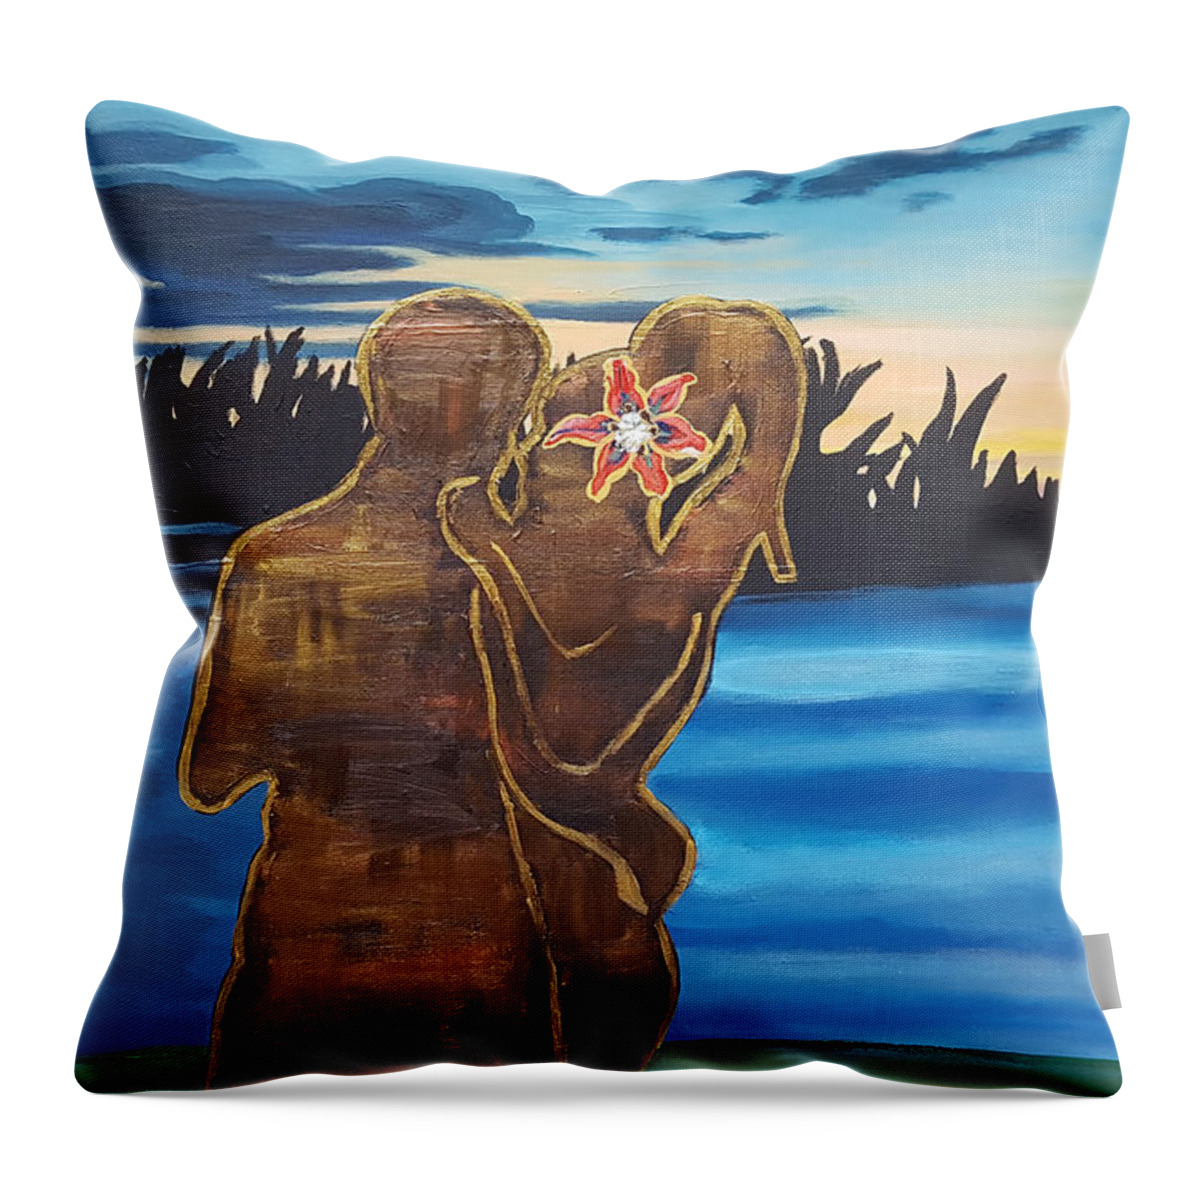 Love Throw Pillow featuring the painting Love Dance by Rachel Natalie Rawlins